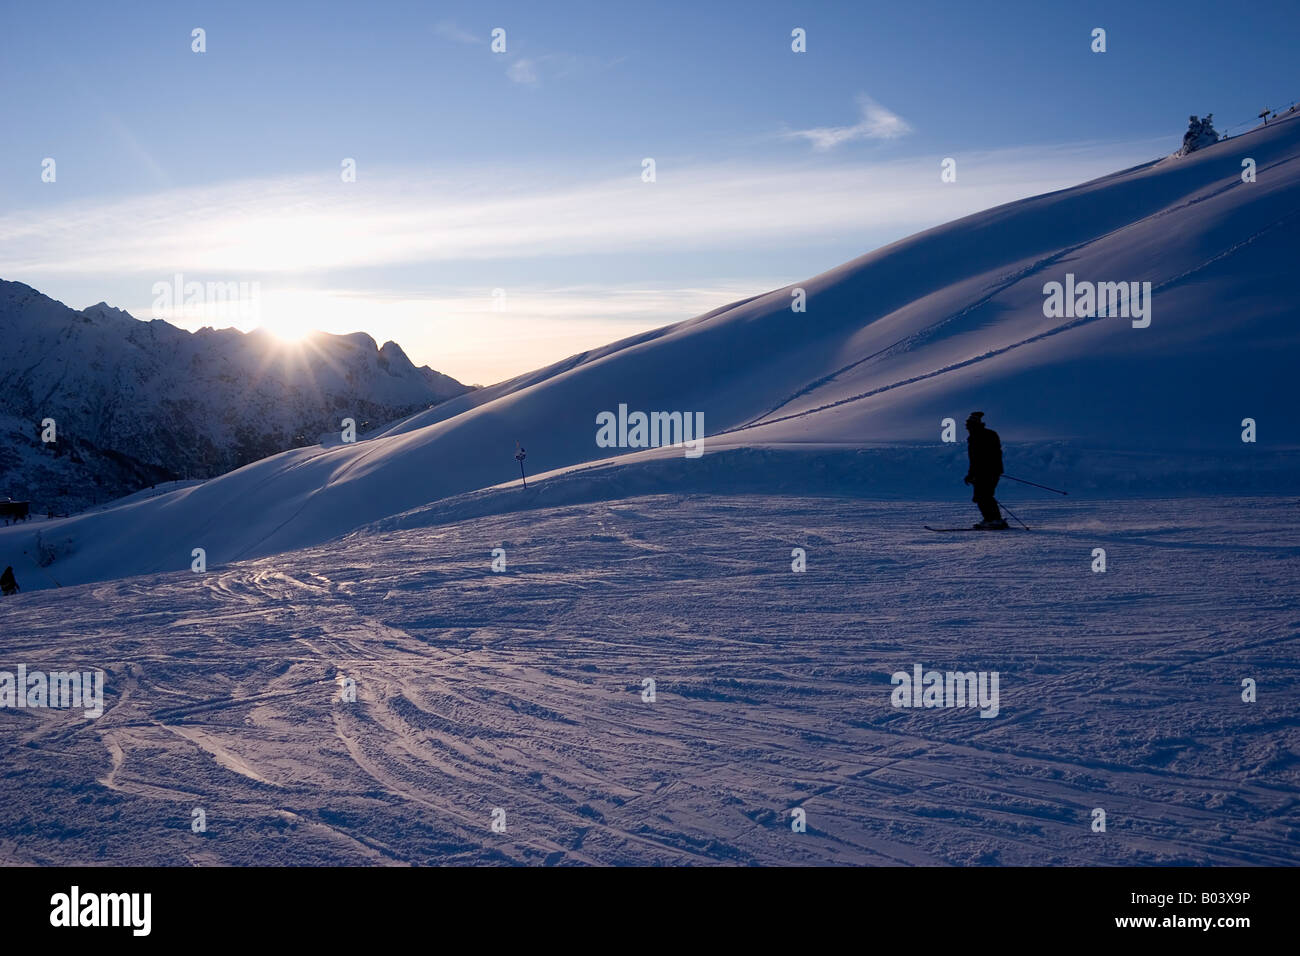 Skier on slopes late afternoon Stock Photo